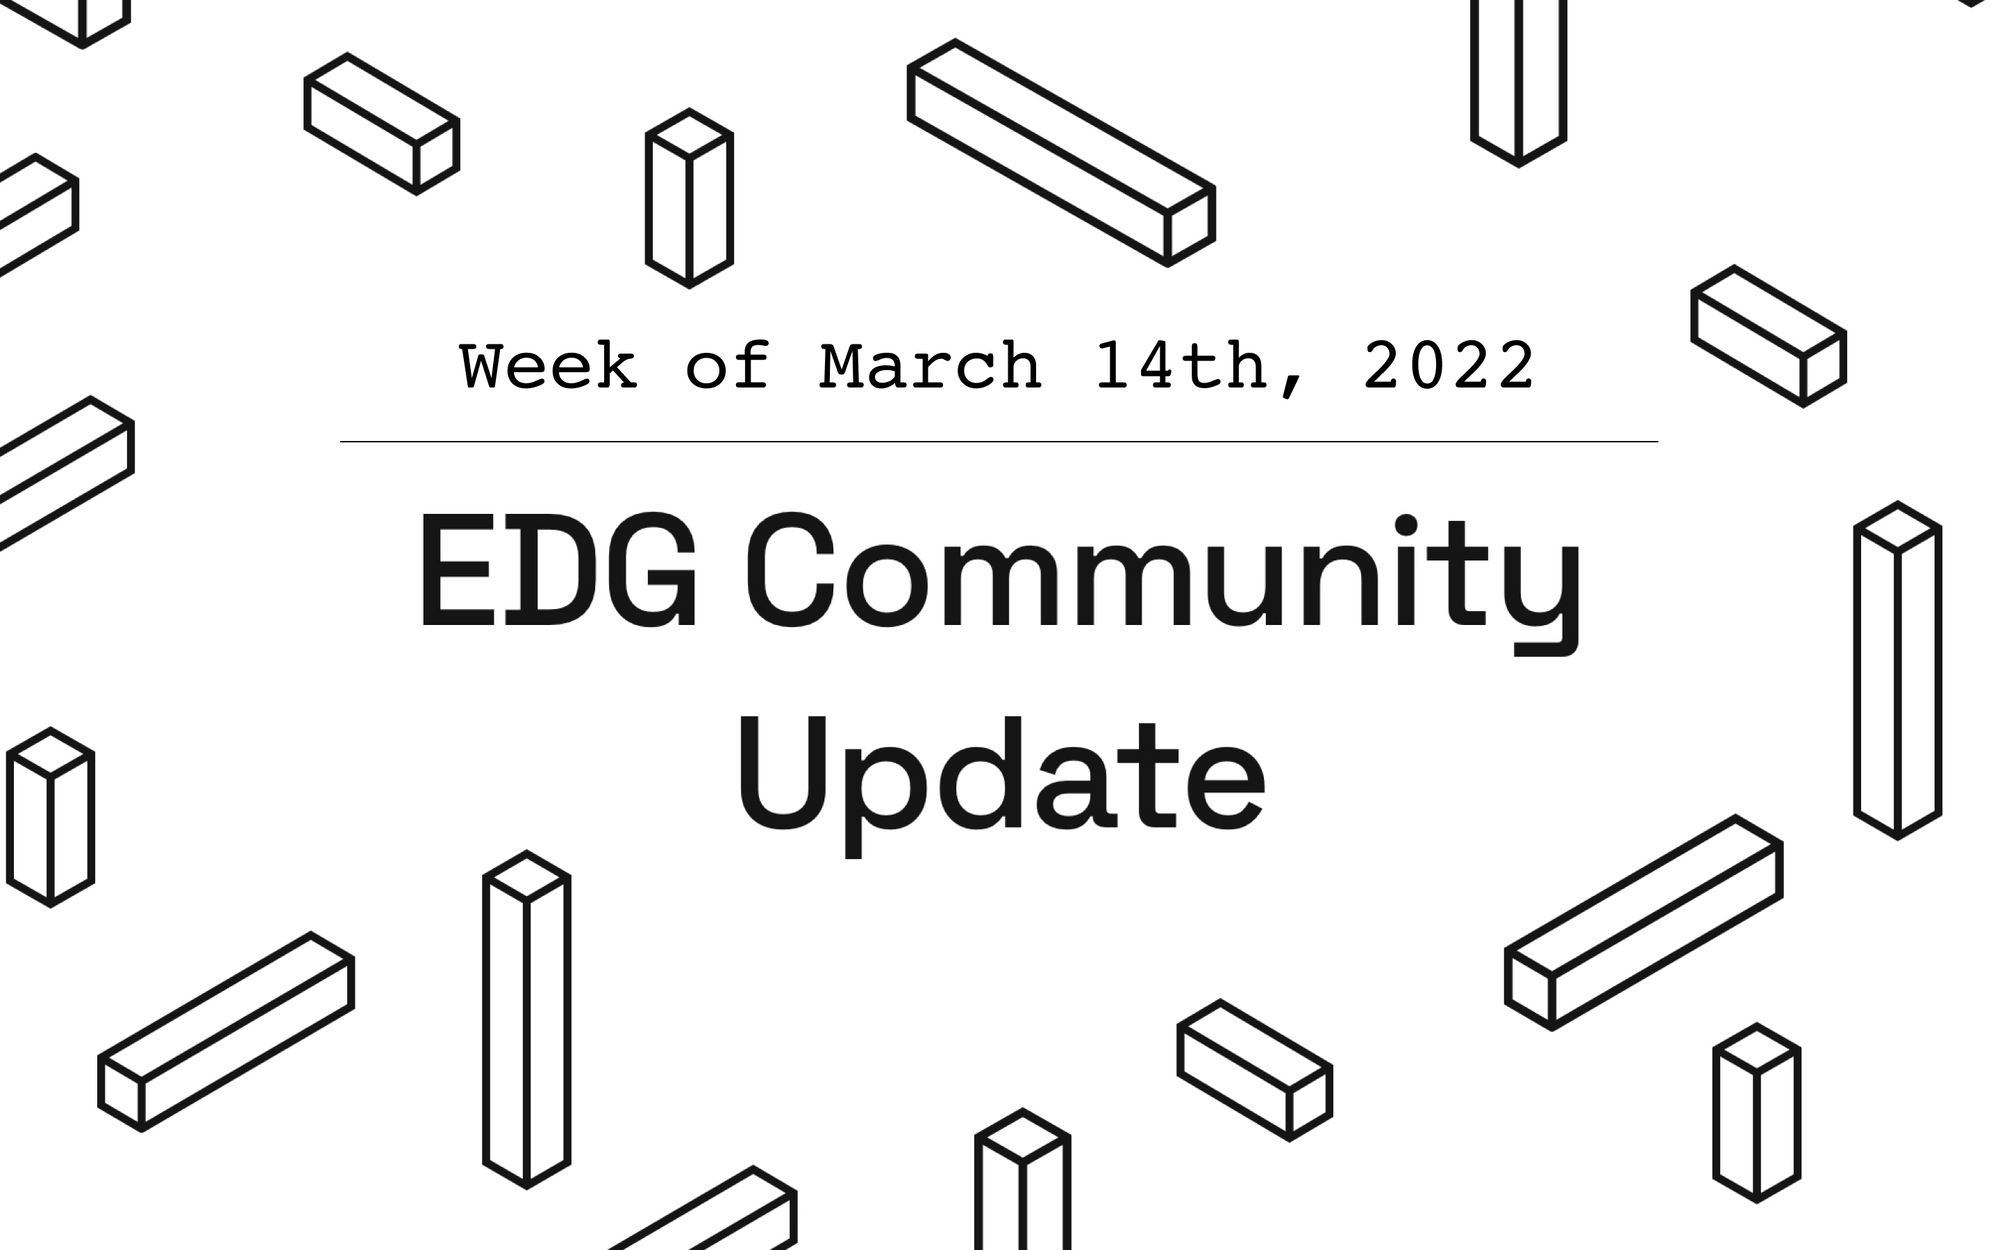 EDG Community Update: March 14th, 2022